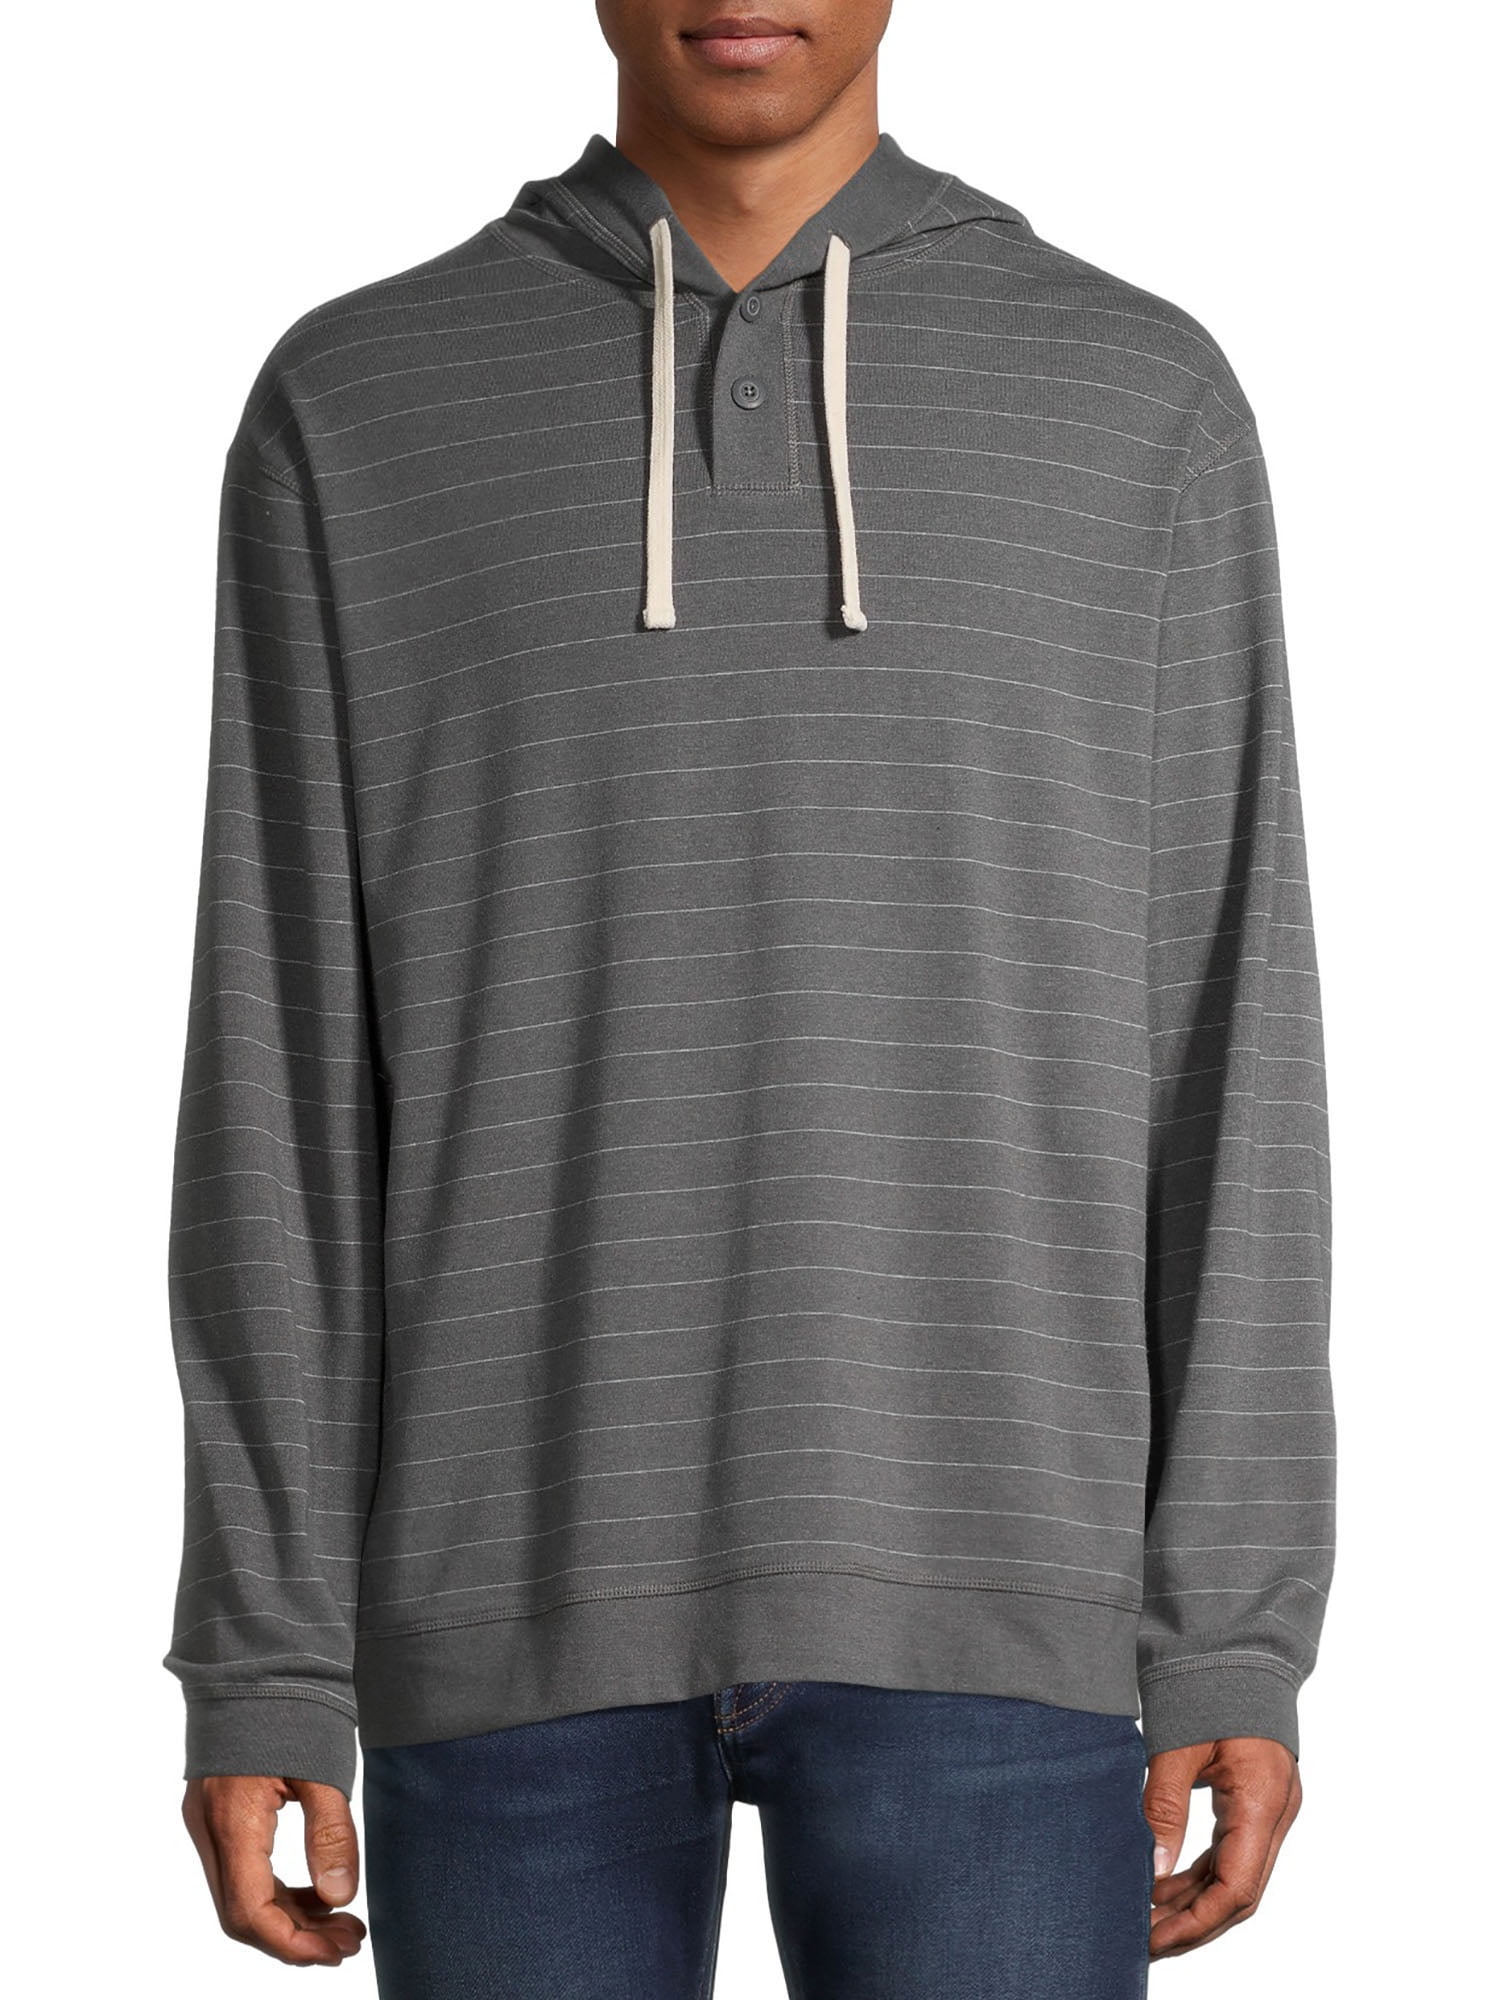 New SONOMA Life Style Men's Striped Henley Hoodie Navy Blue MSRP $44 